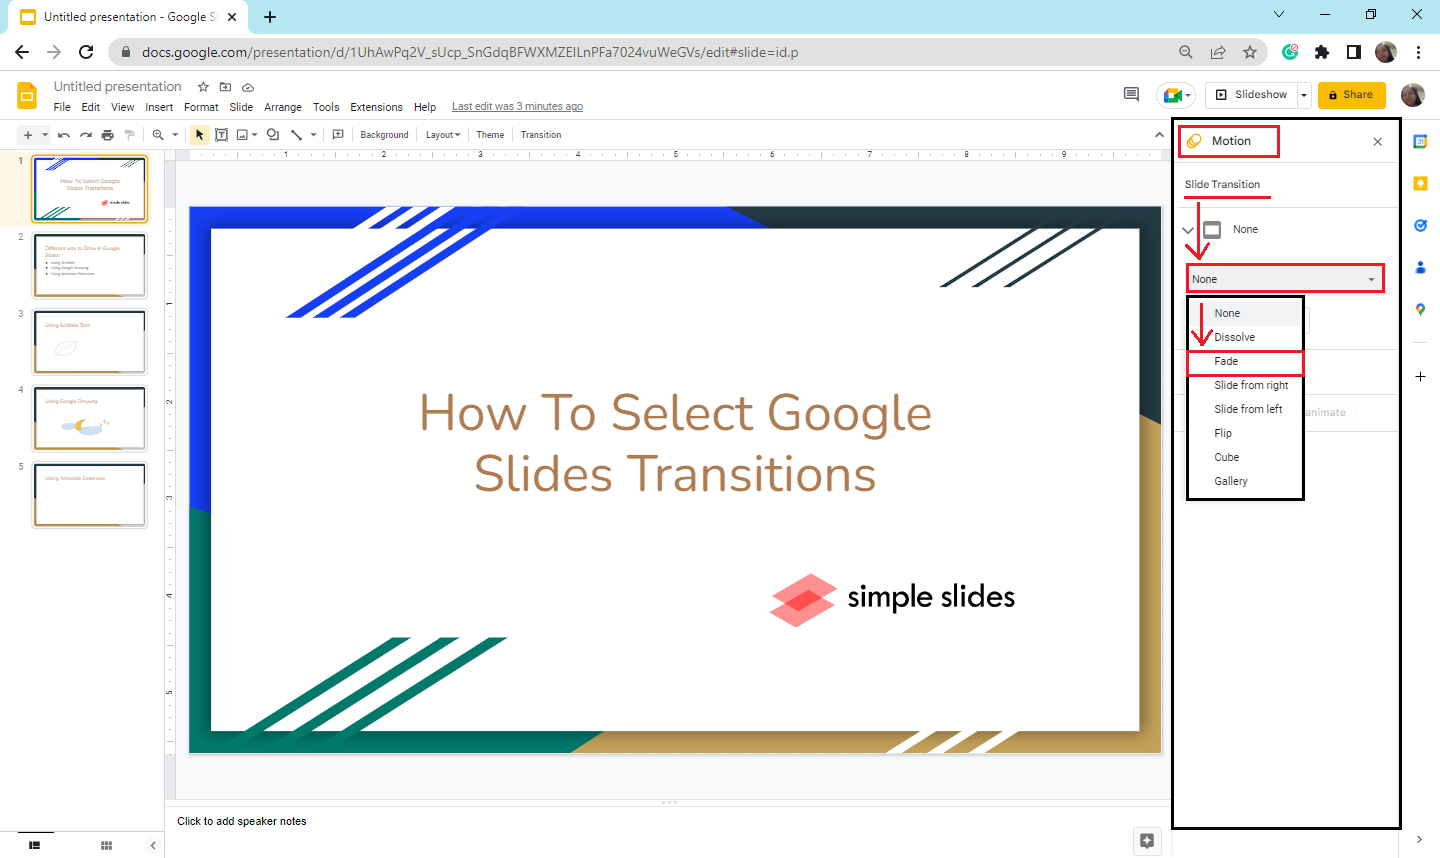 Motion pane will appear in the right corner of your slides, select a desired transition under the "Slide transition"